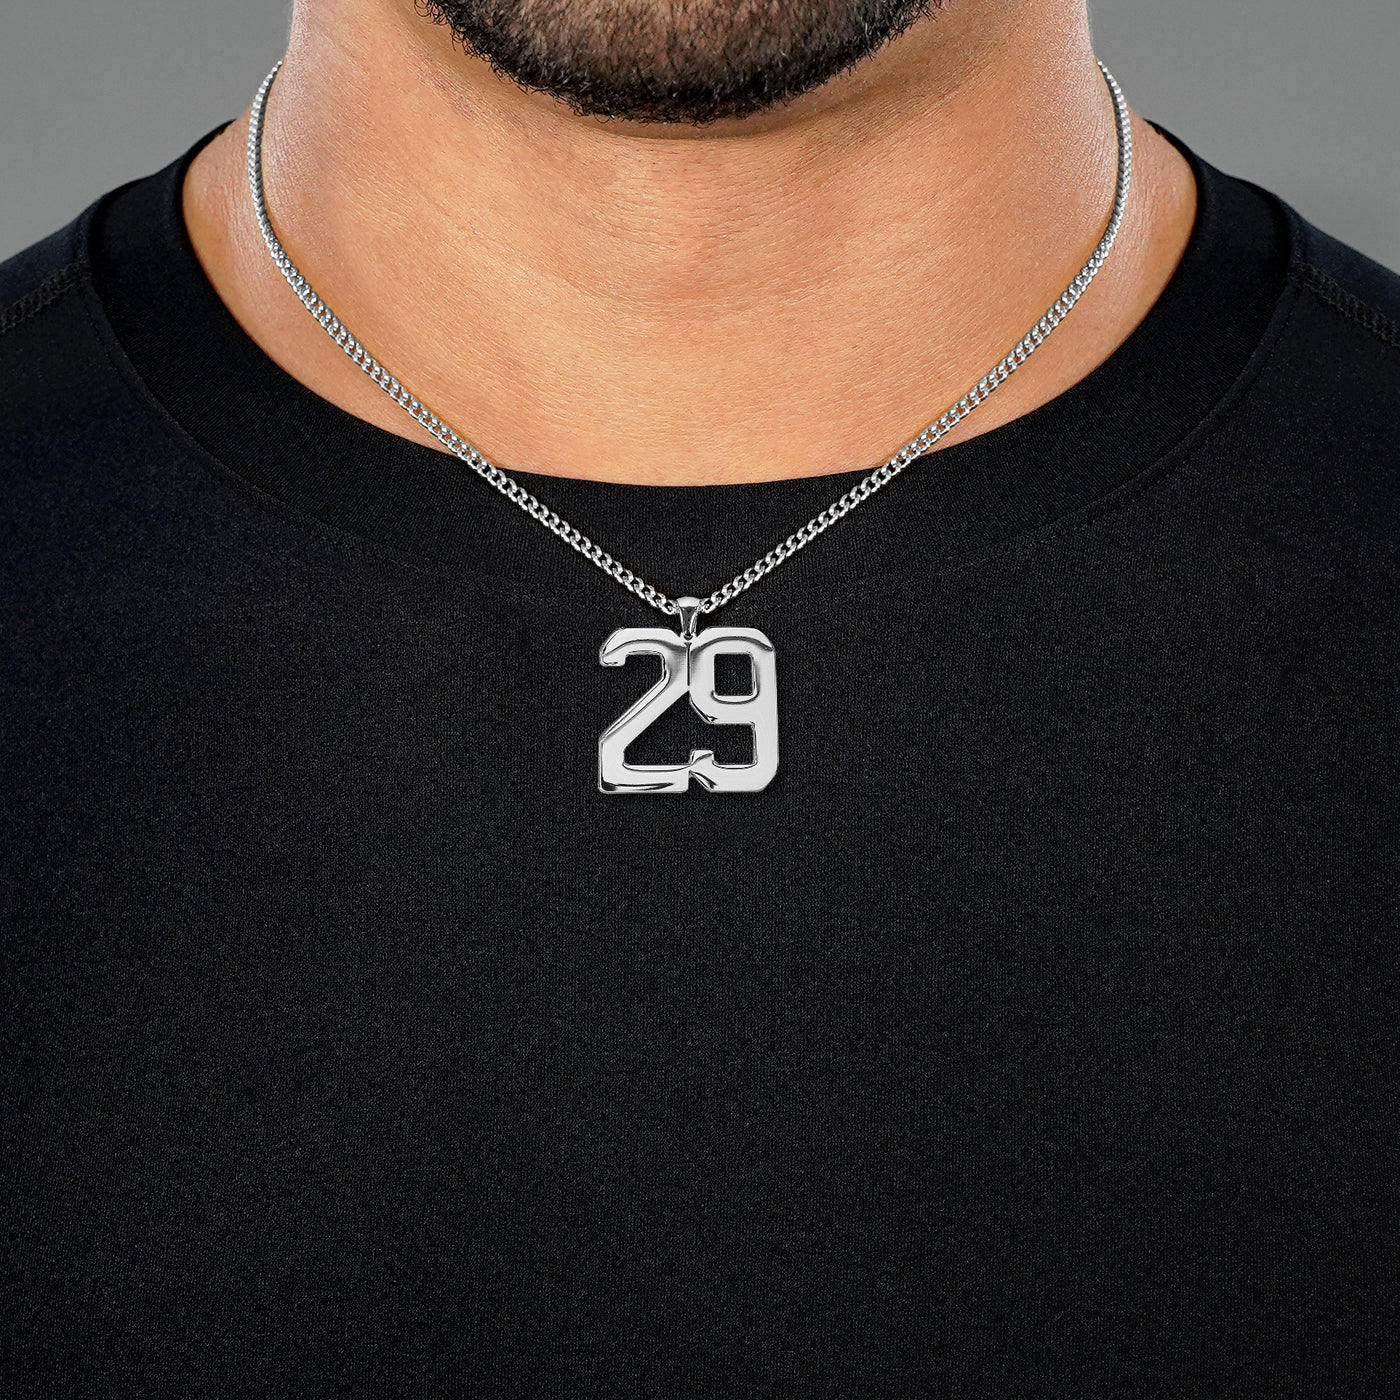 29 Number Pendant with Chain Necklace - Stainless Steel